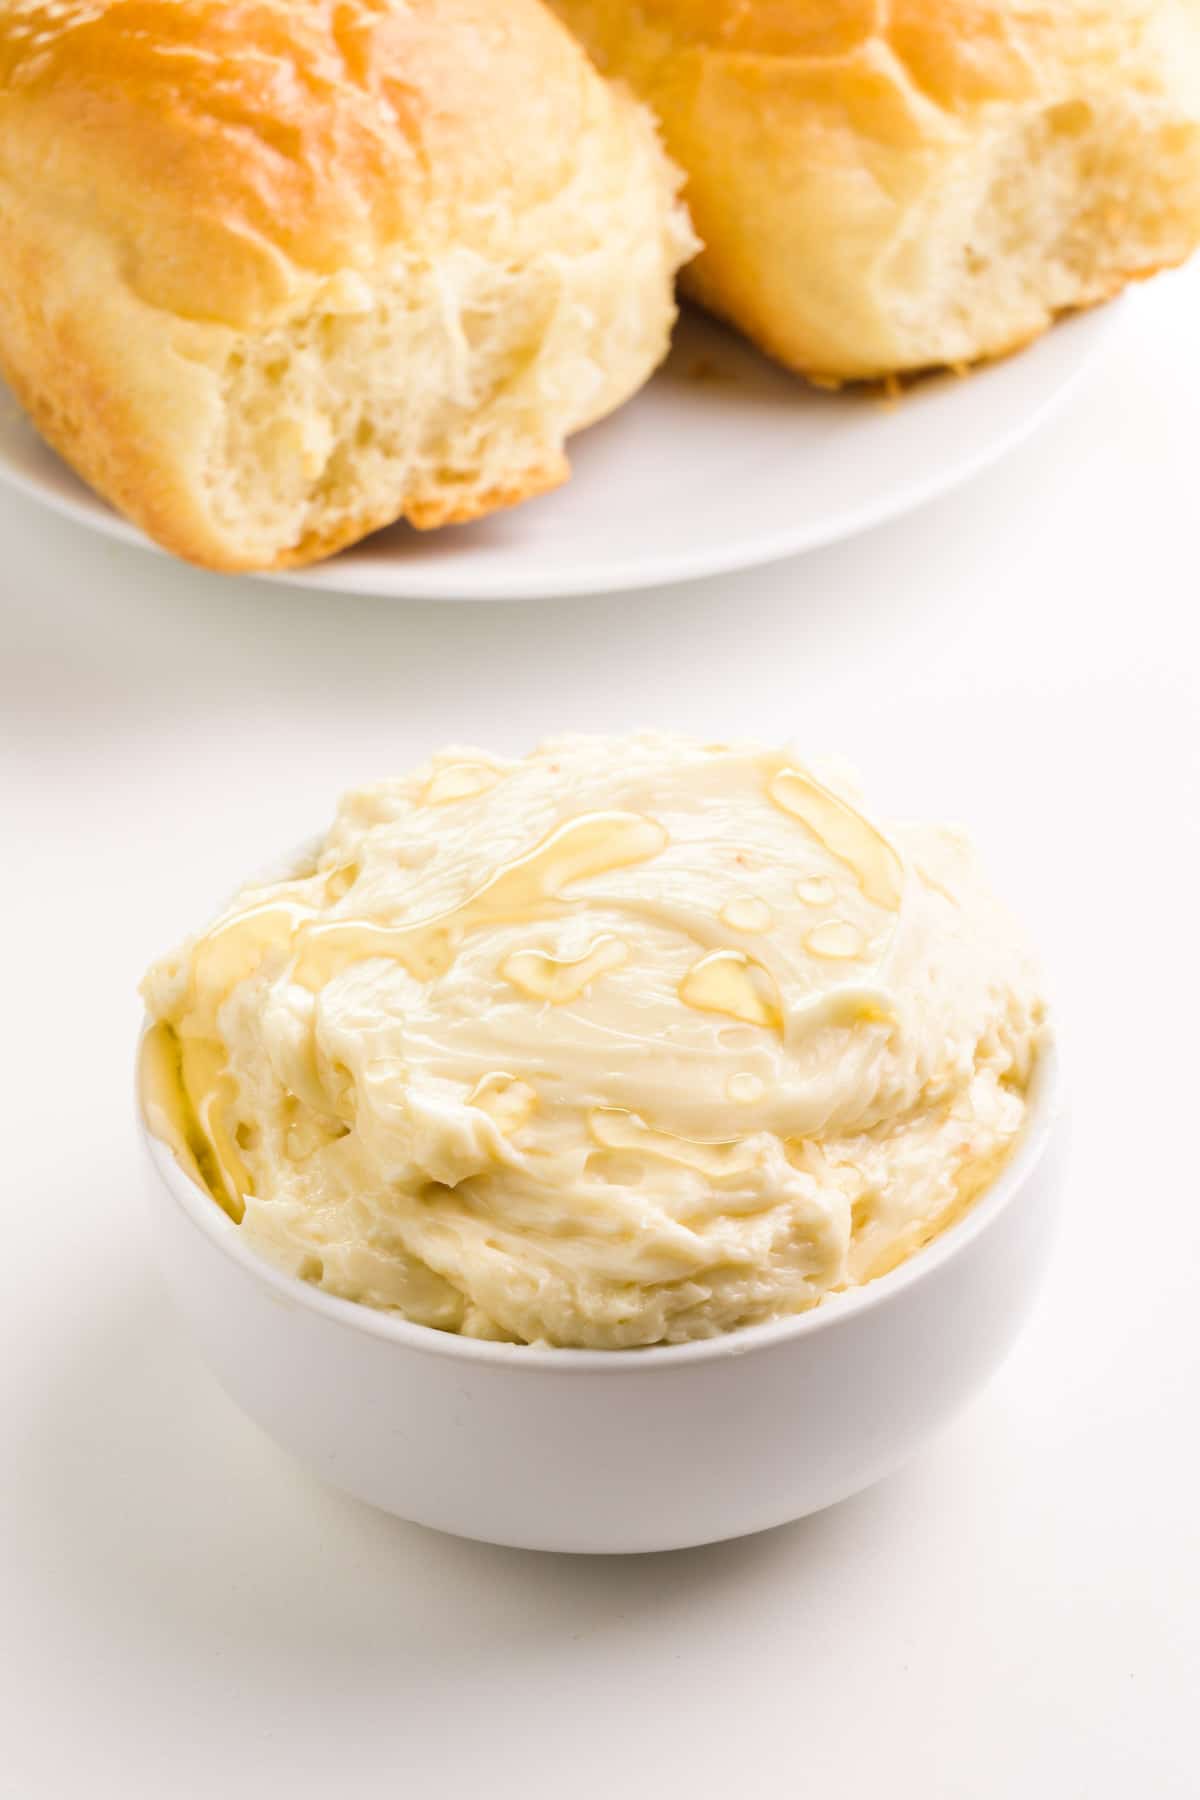 A bowl of vegan honey butter sits in front of a plate with dinner rolls.